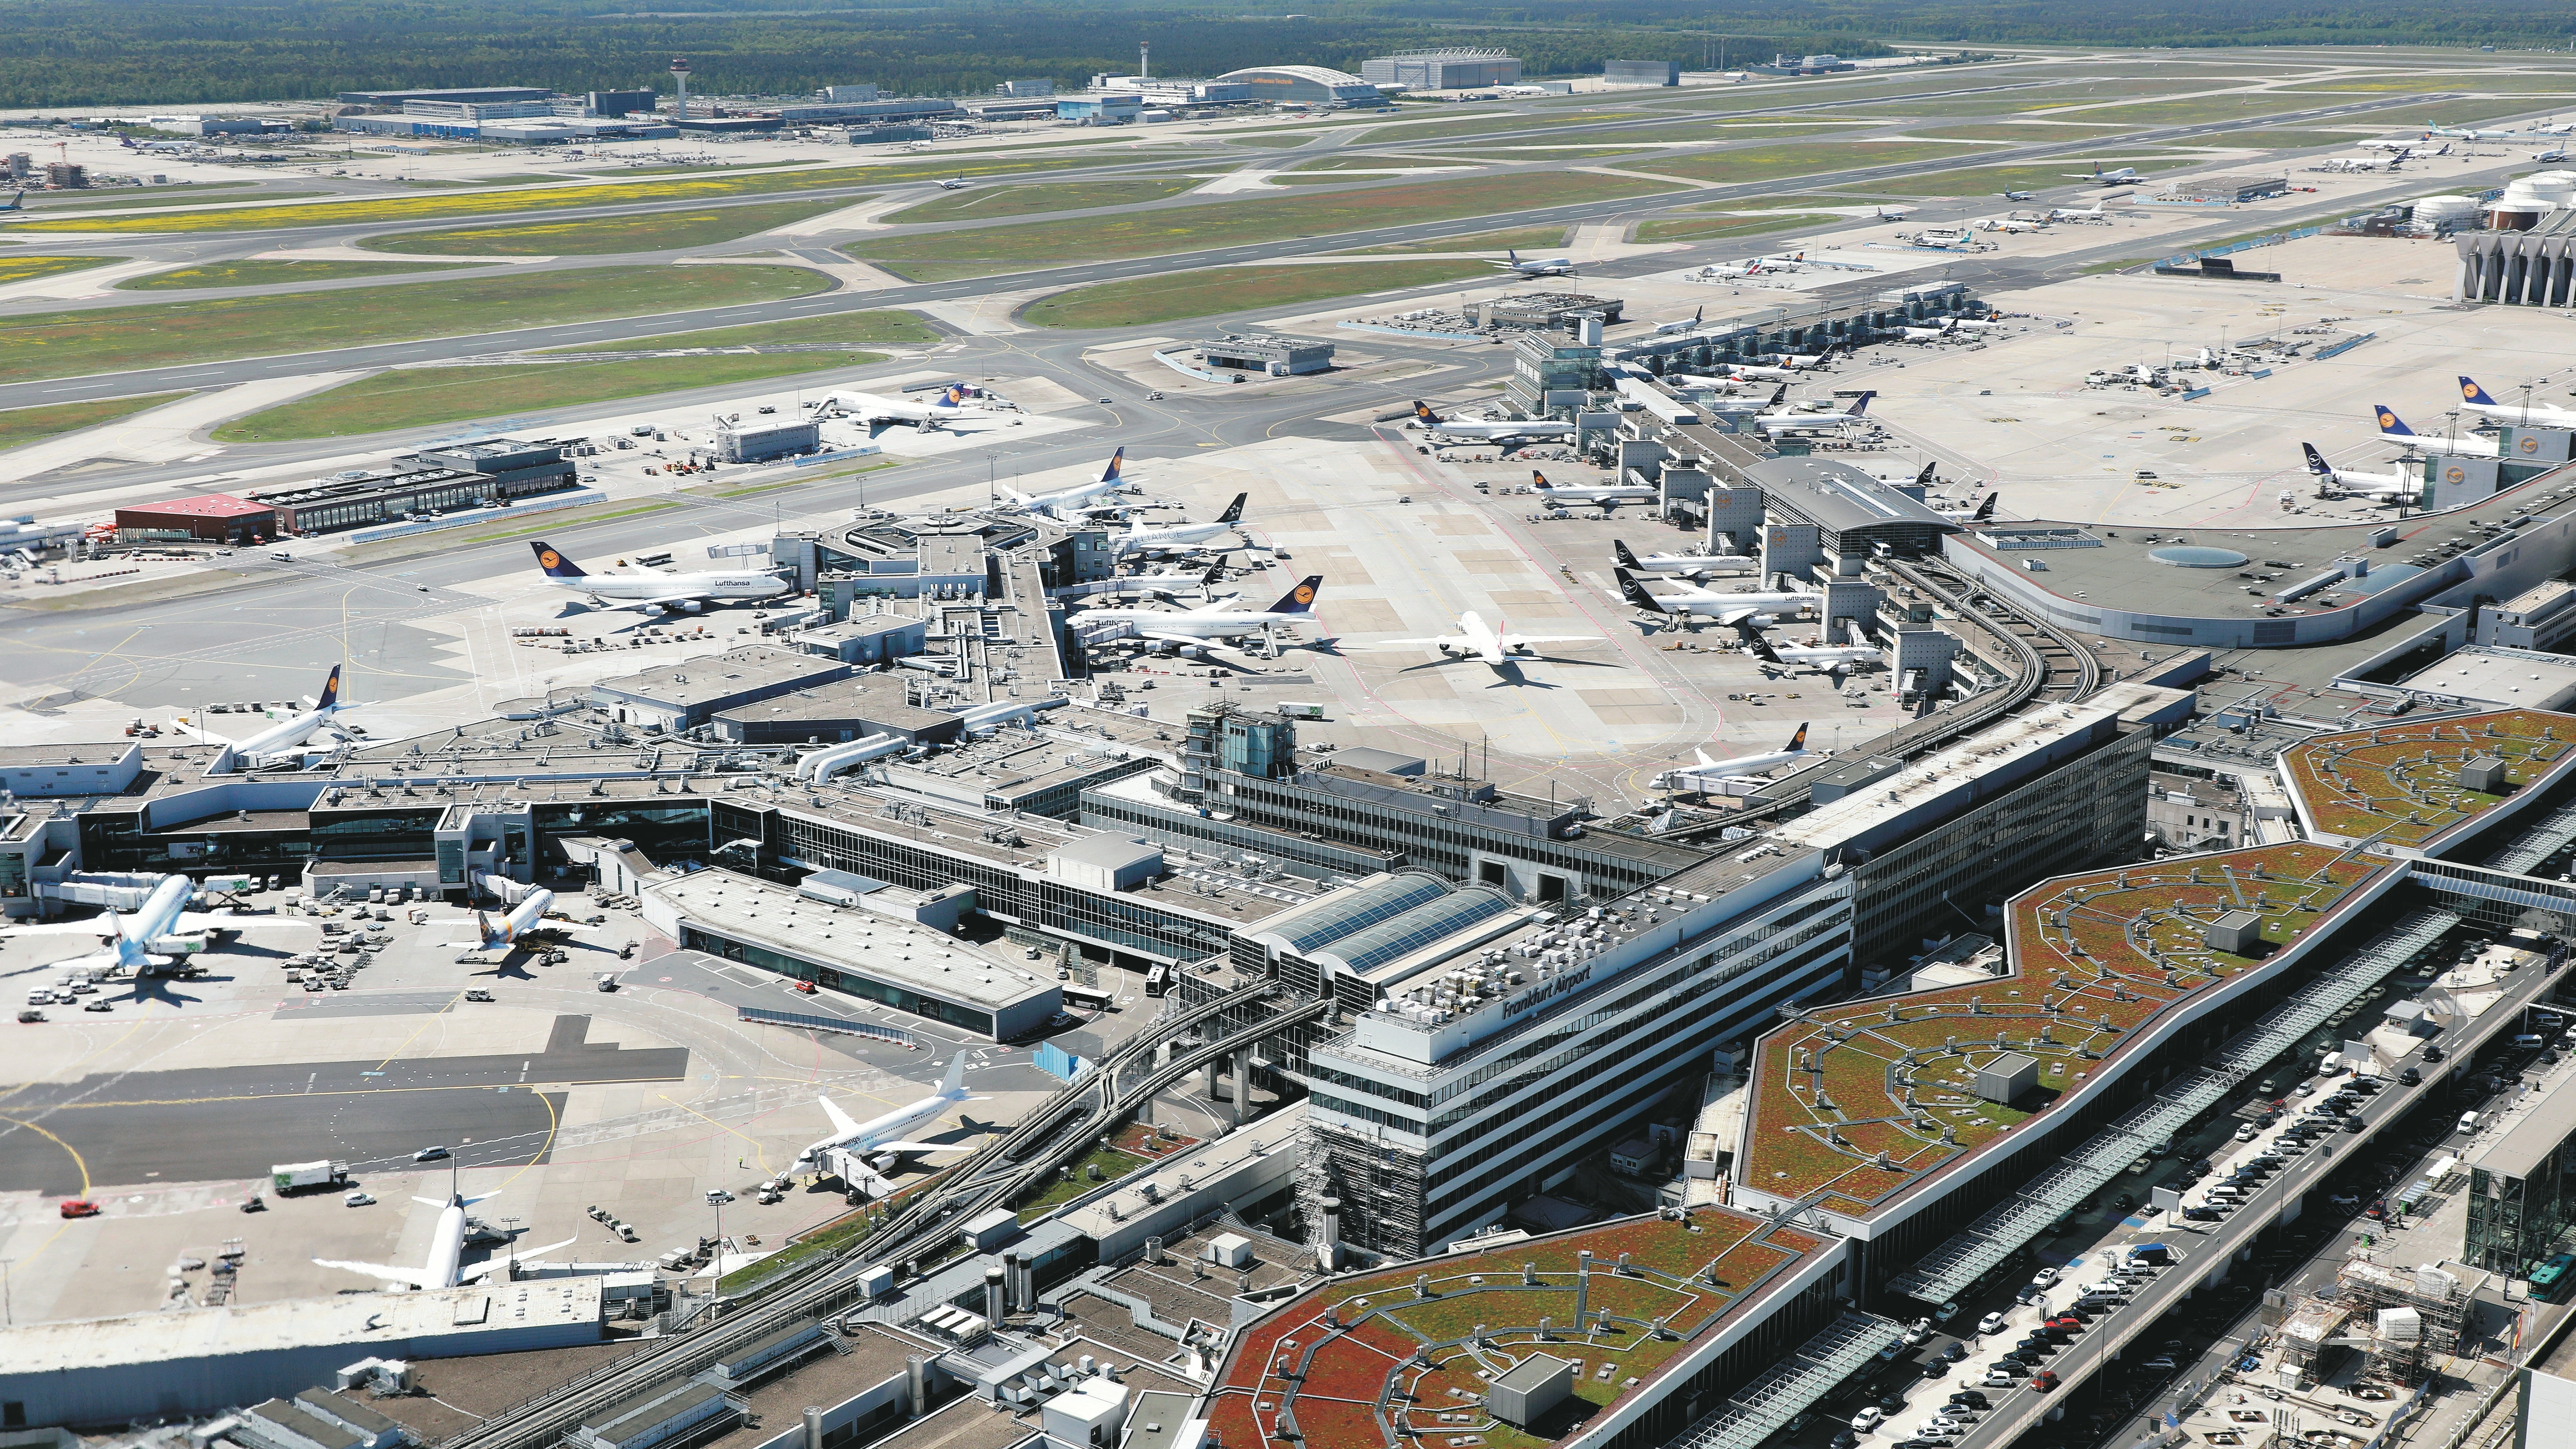 Traffic – June 2022: Passenger Numbers Continue to Rise